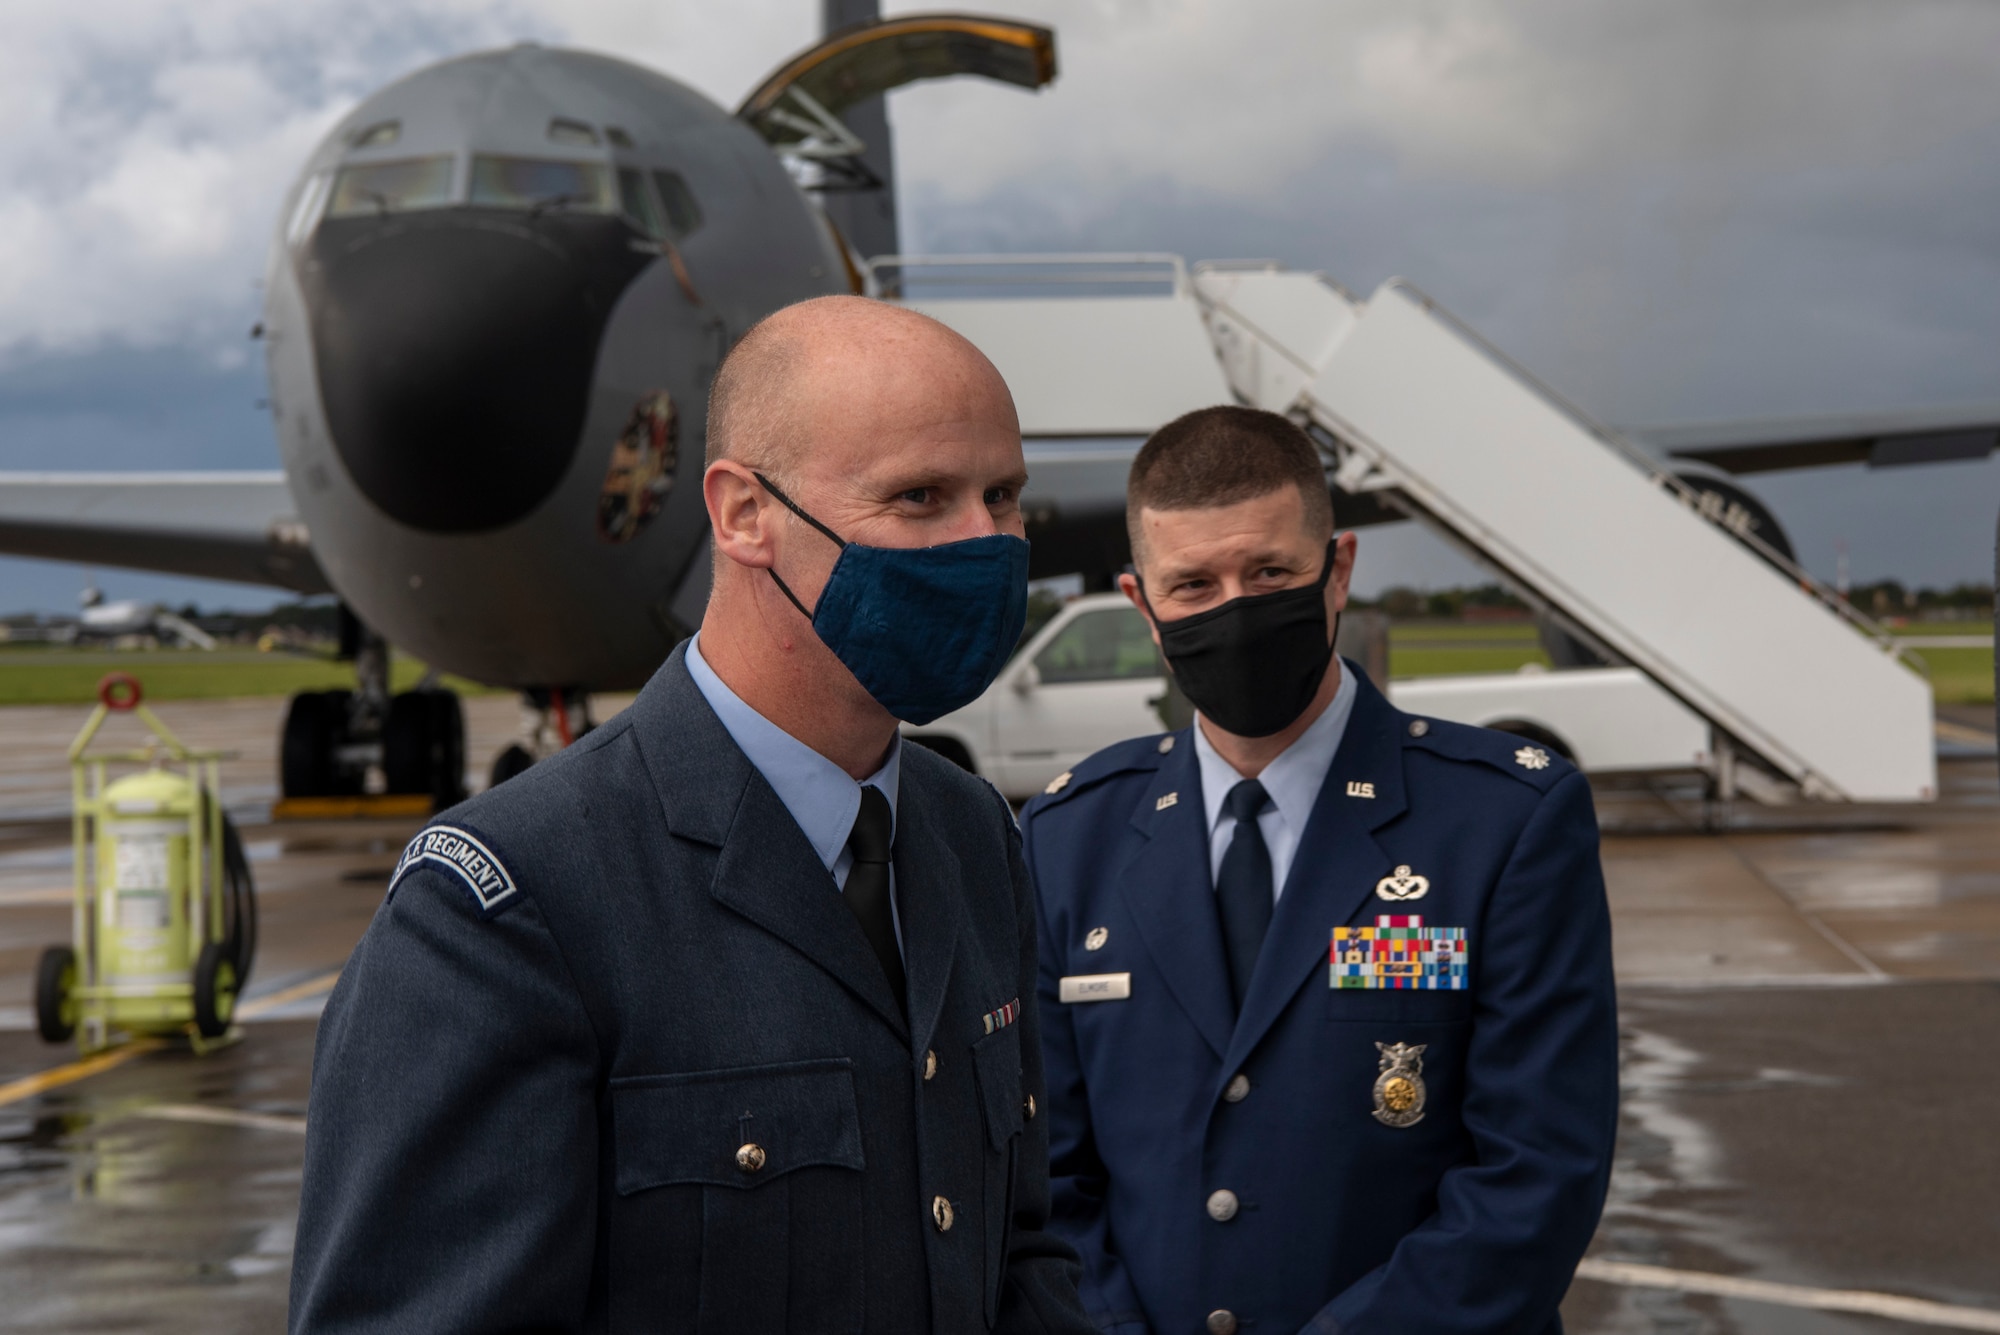 Royal Air Force and U.S. Air Force work together